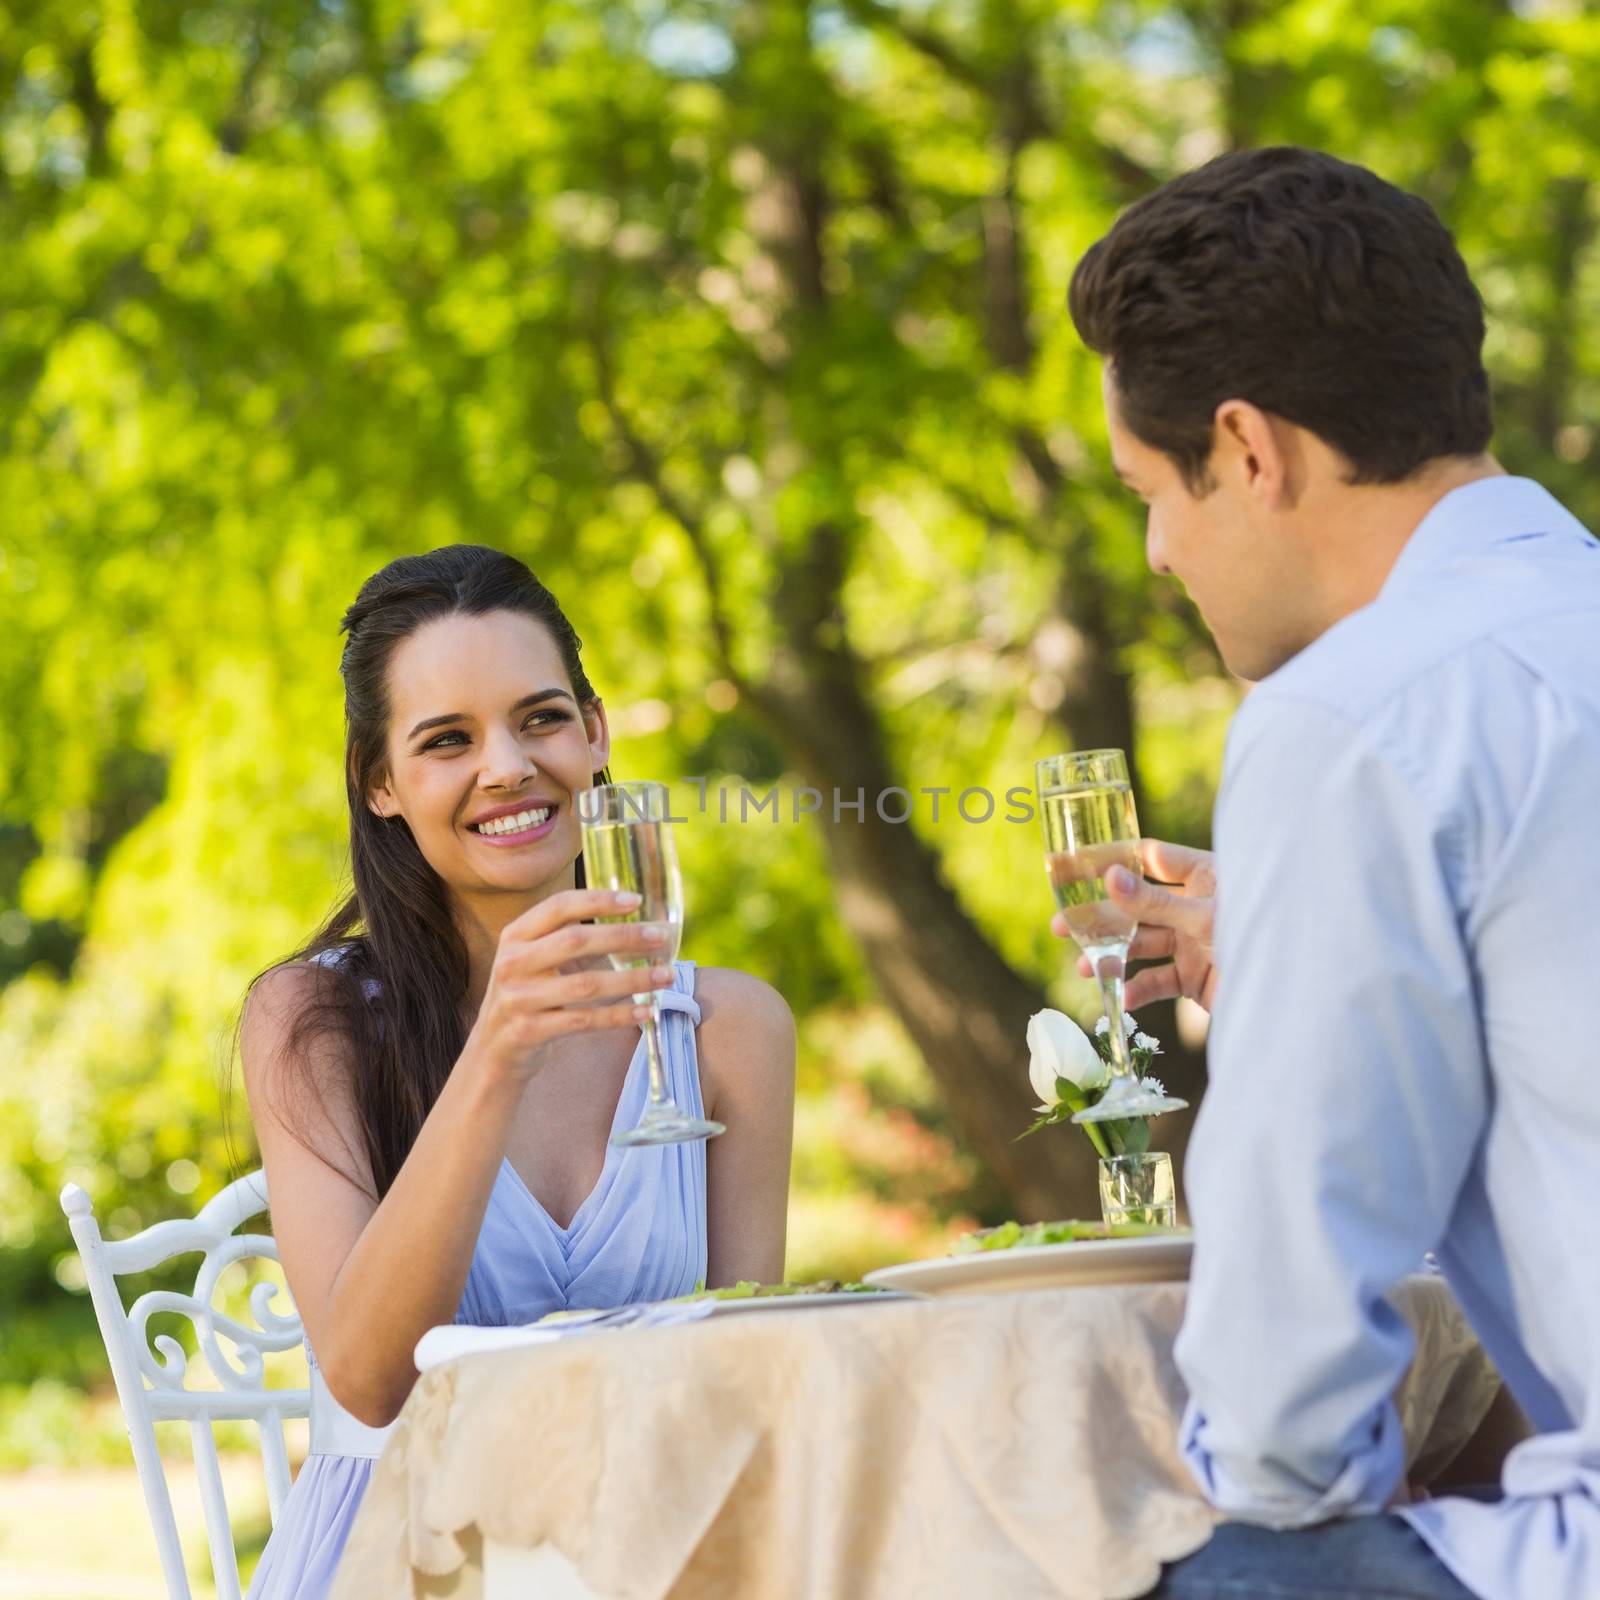 Smiling young couple toasting champagne flutes at an outdoor café